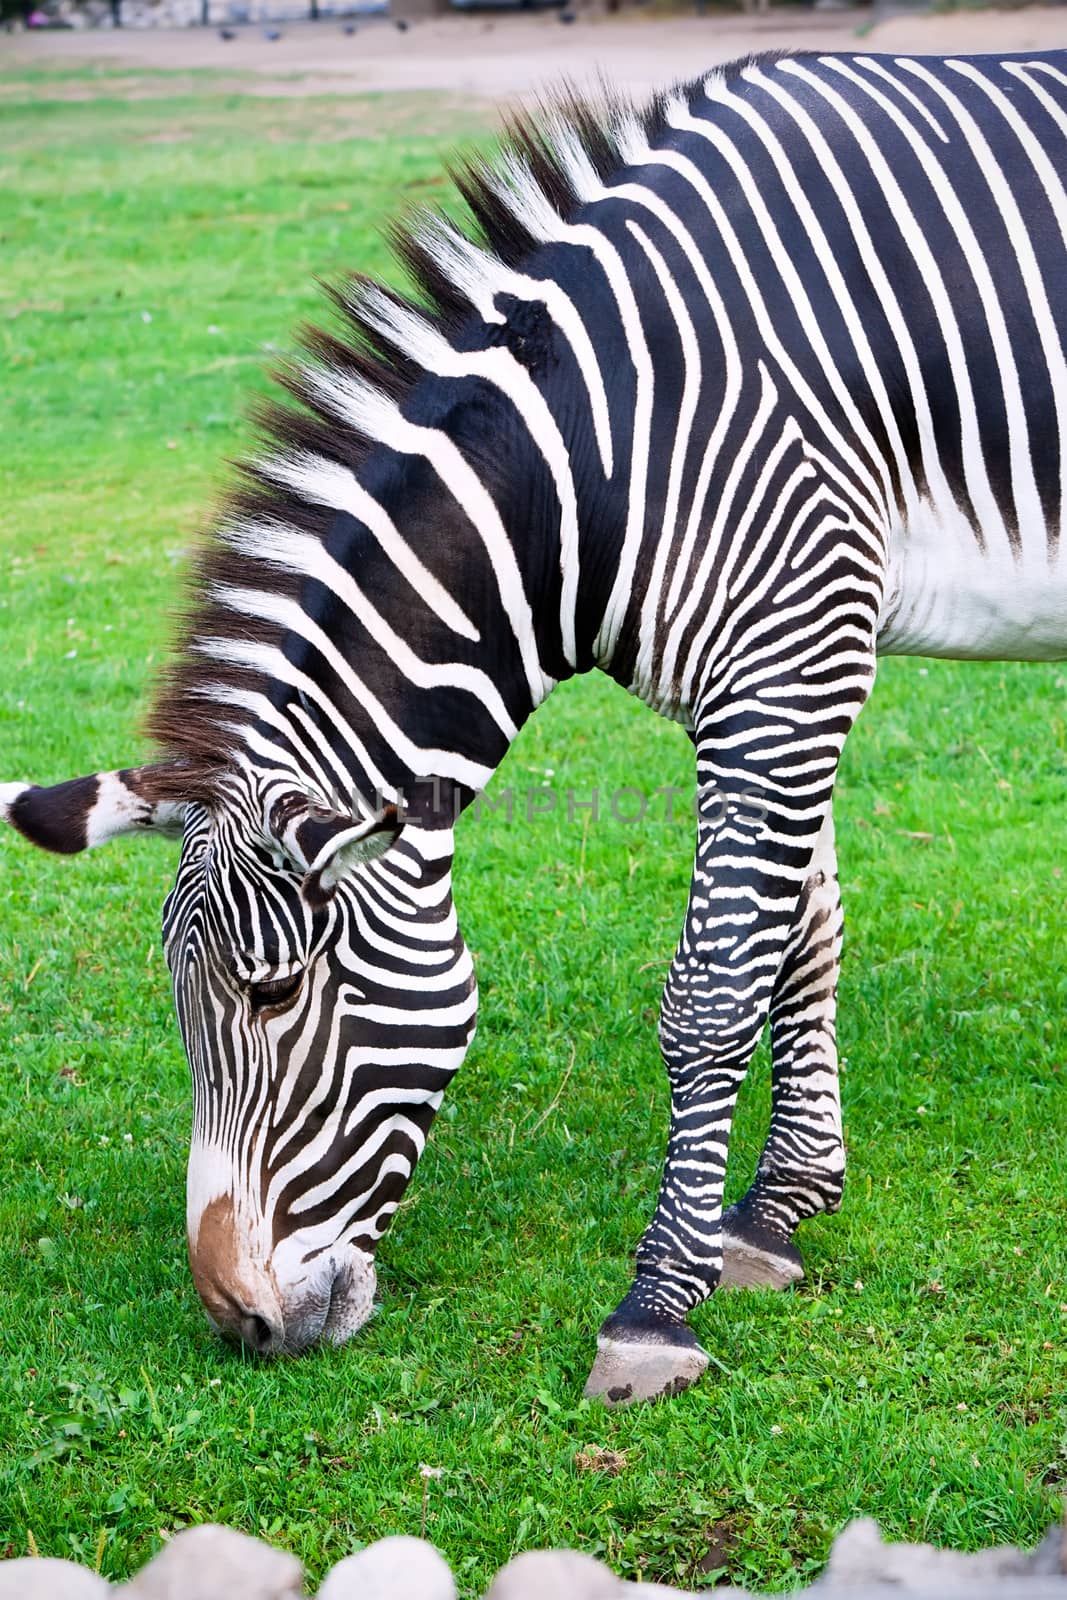 Nice close-up photo of young male zebra in zoo